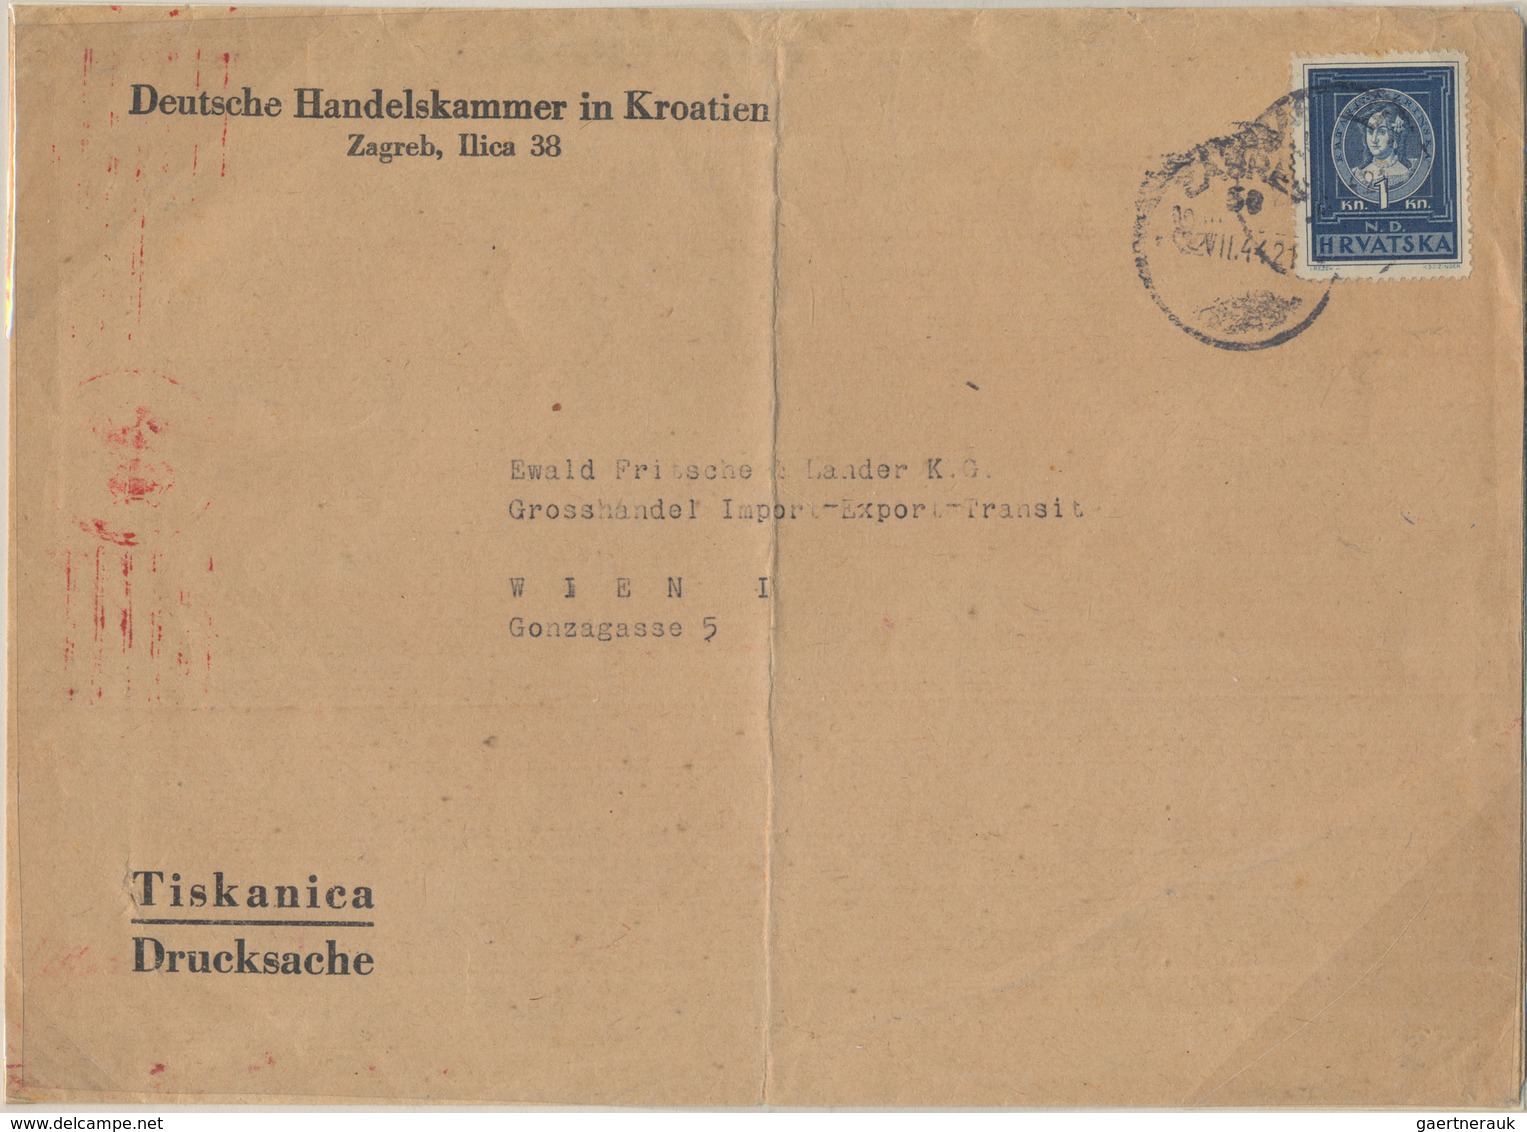 Kroatien: 1941/1945, Postal History of Croatia, extraordinary exhibit of apprx. 280 covers/cards on